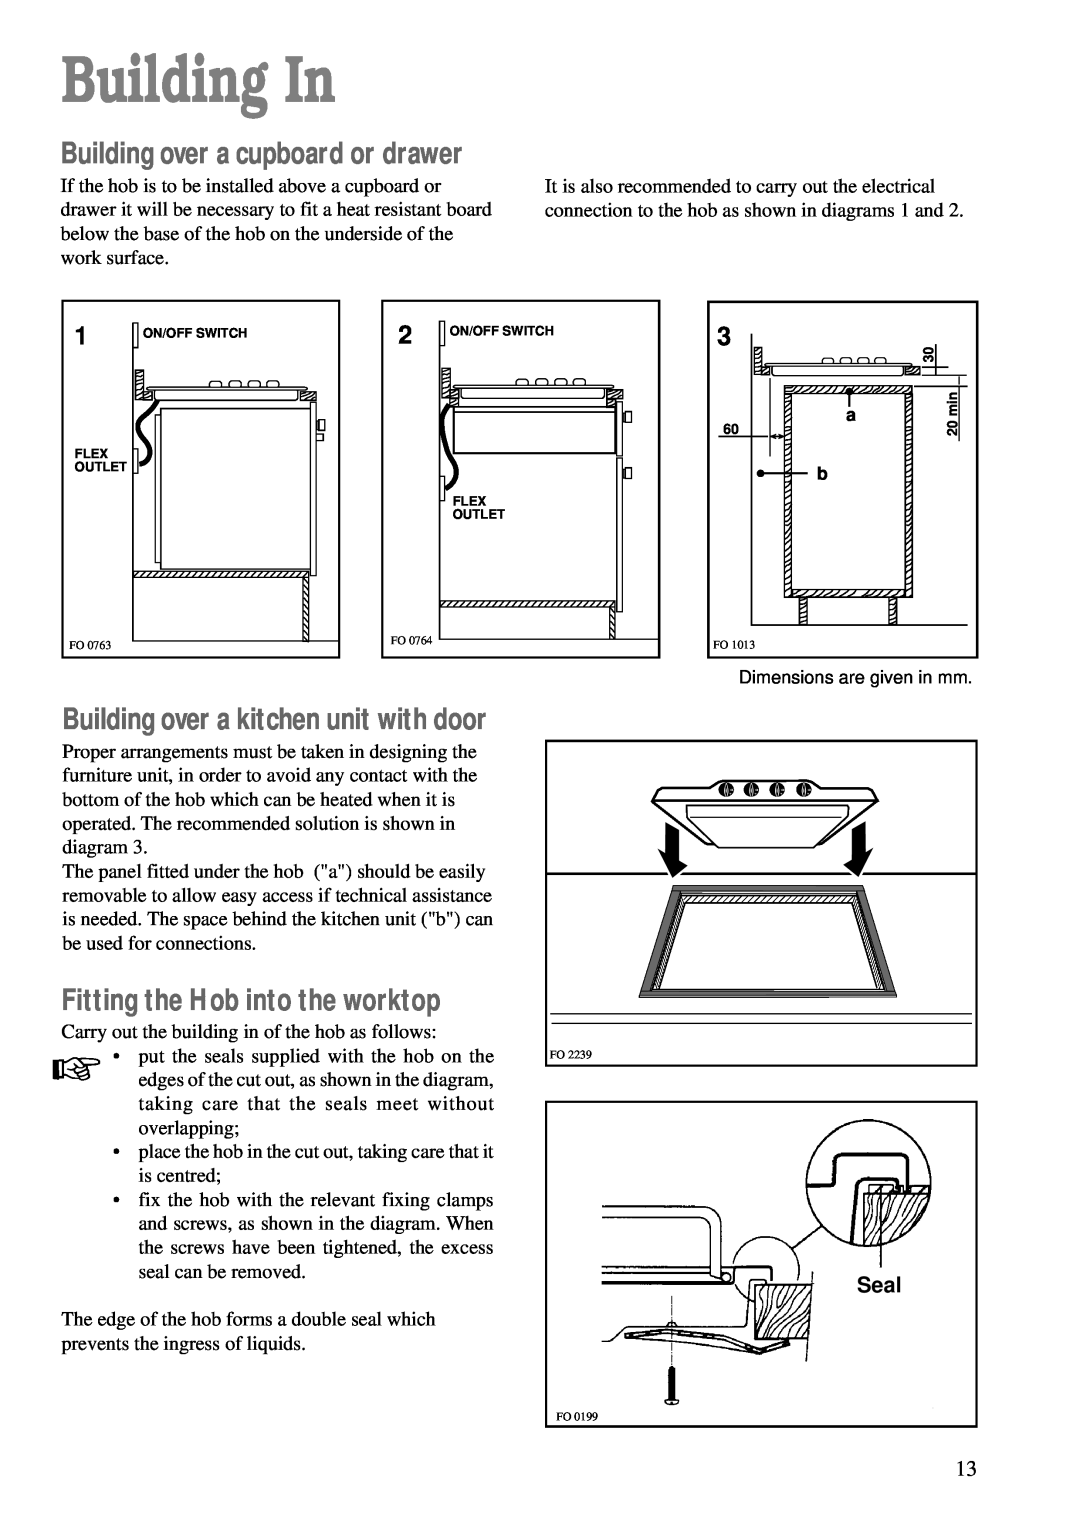 Zanussi ZGF 642 manual Building In, Fitting the Hob into the worktop, Seal, Building over a cupboard or drawer 